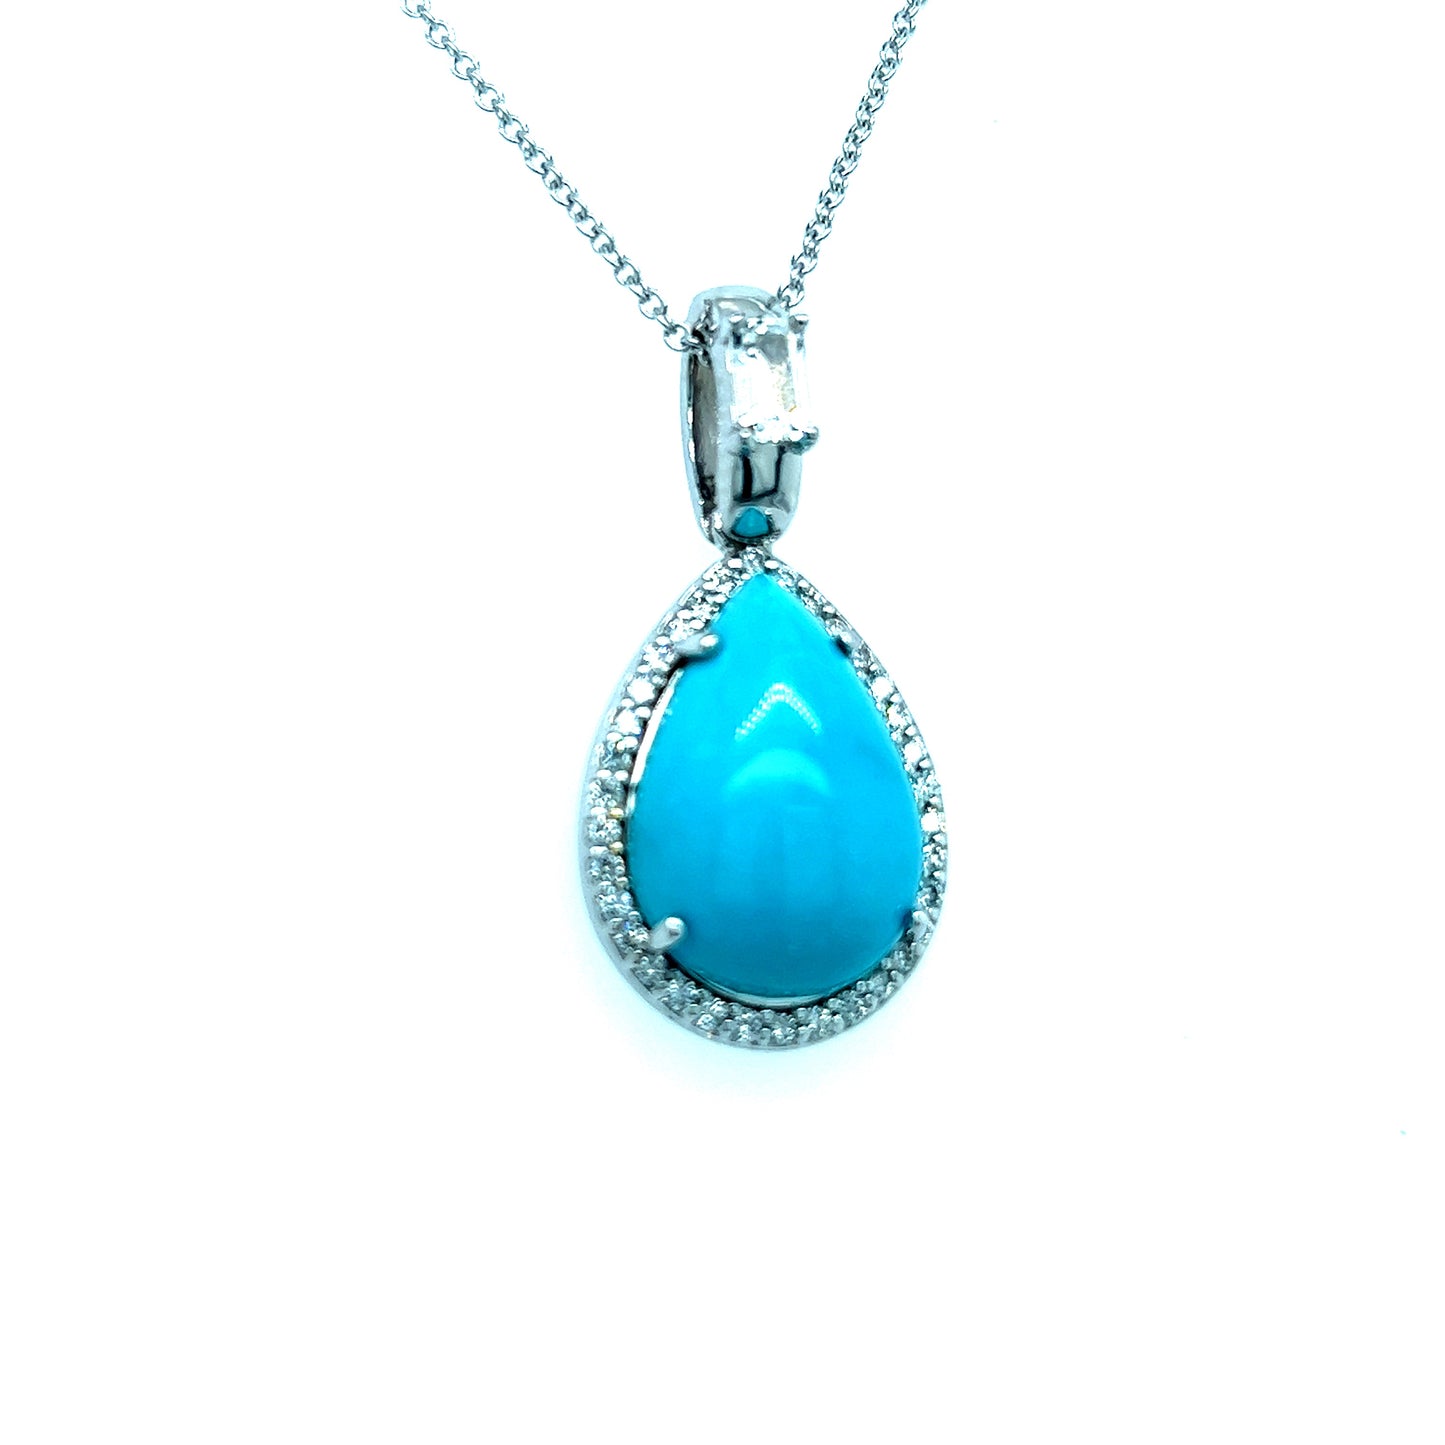 Natural Persian Turquoise Sapphire Diamond Pendant Necklace 18" 14k WG 8.44 TCW Certified $5,975 219119